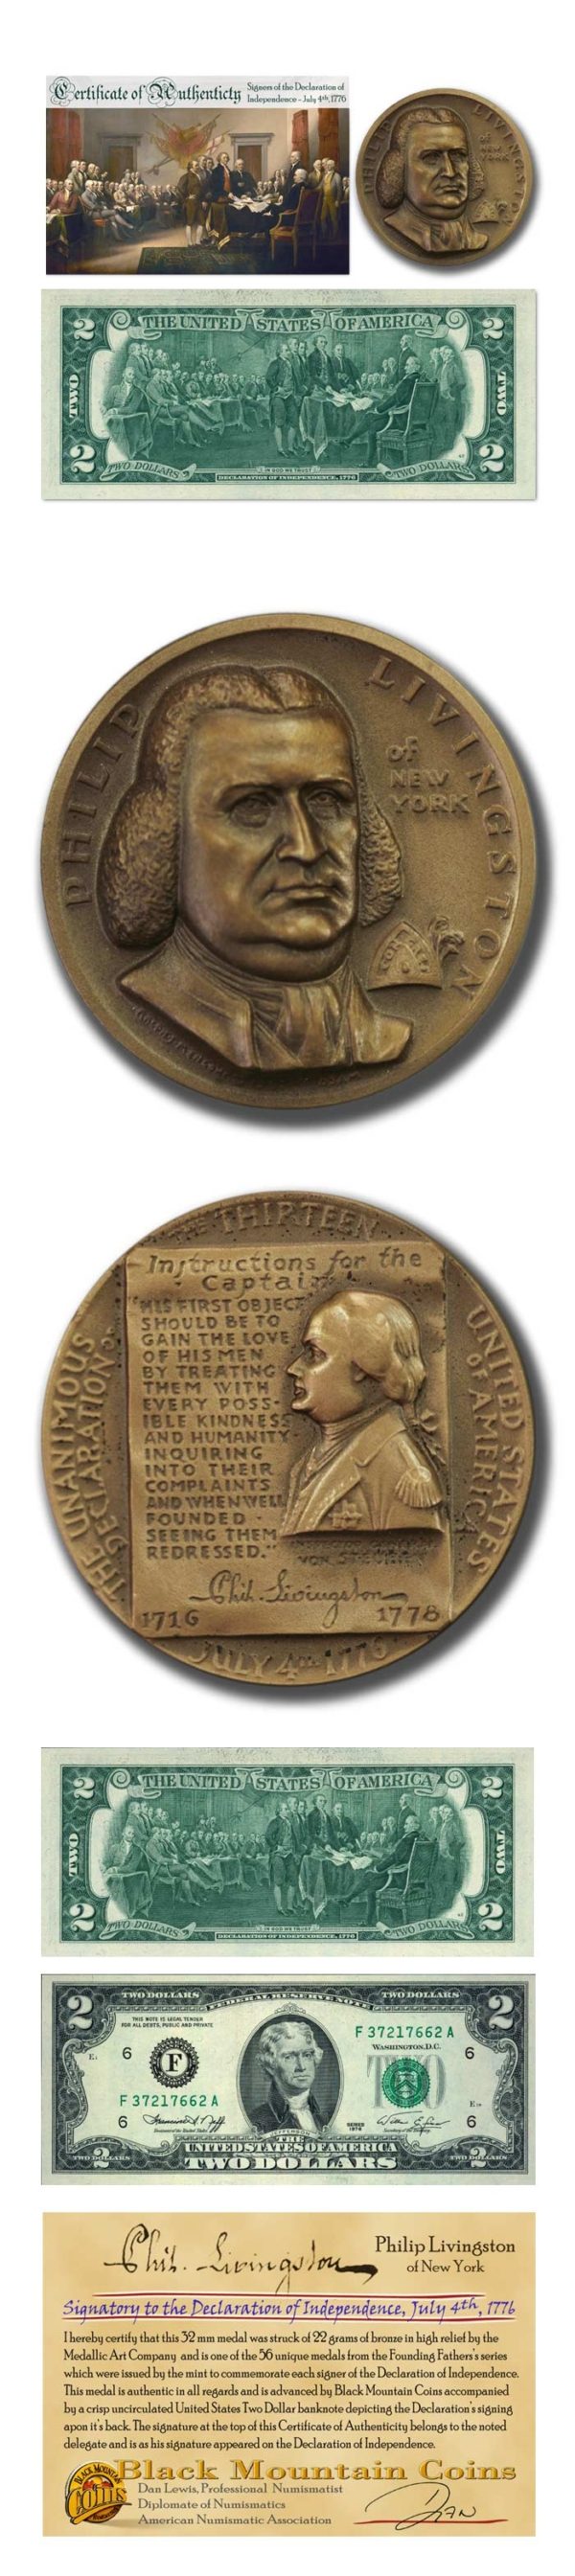 Founding Fathers-New York-Philip Livingston-32 mm High Relief Bronze Medal